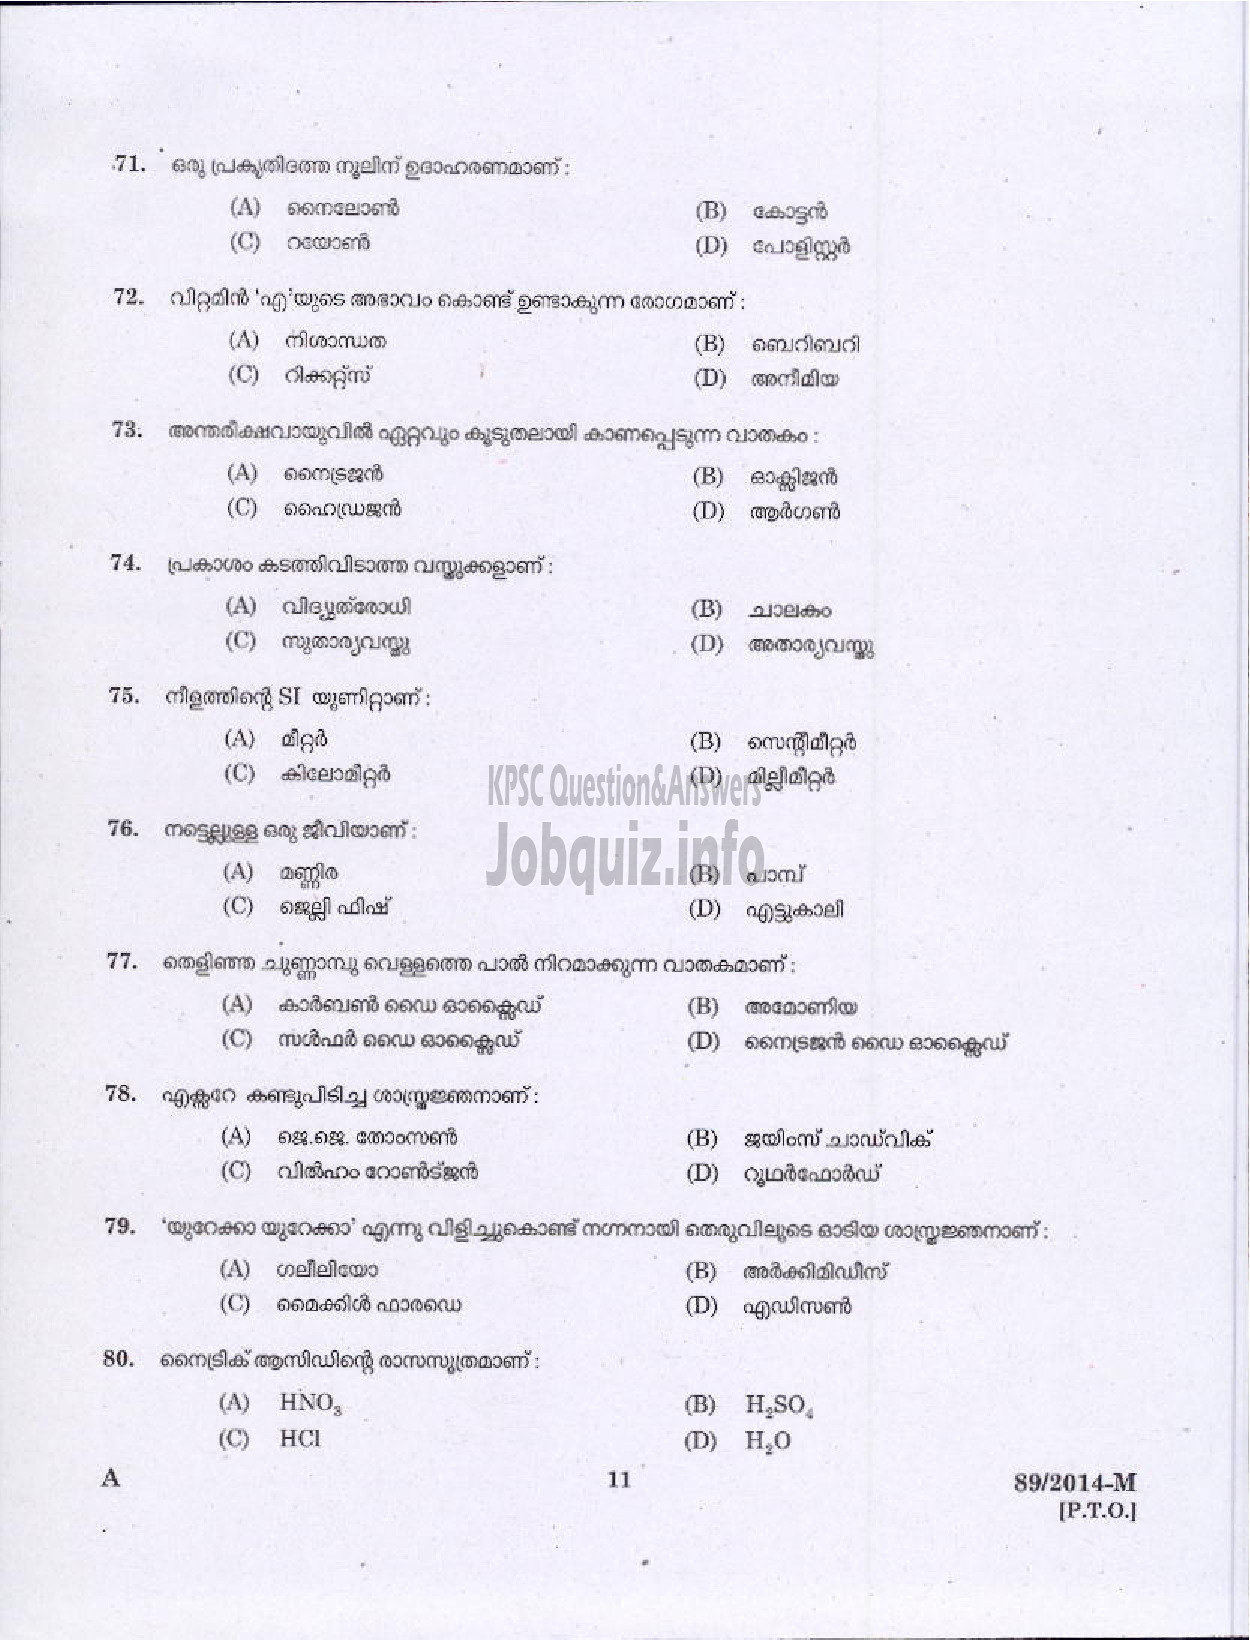 Kerala PSC Question Paper - ATTENDER SR FOR ST ONLY TCC LTD AND LGS NCA OBC VARIOUS KTYM ( Malayalam ) -9